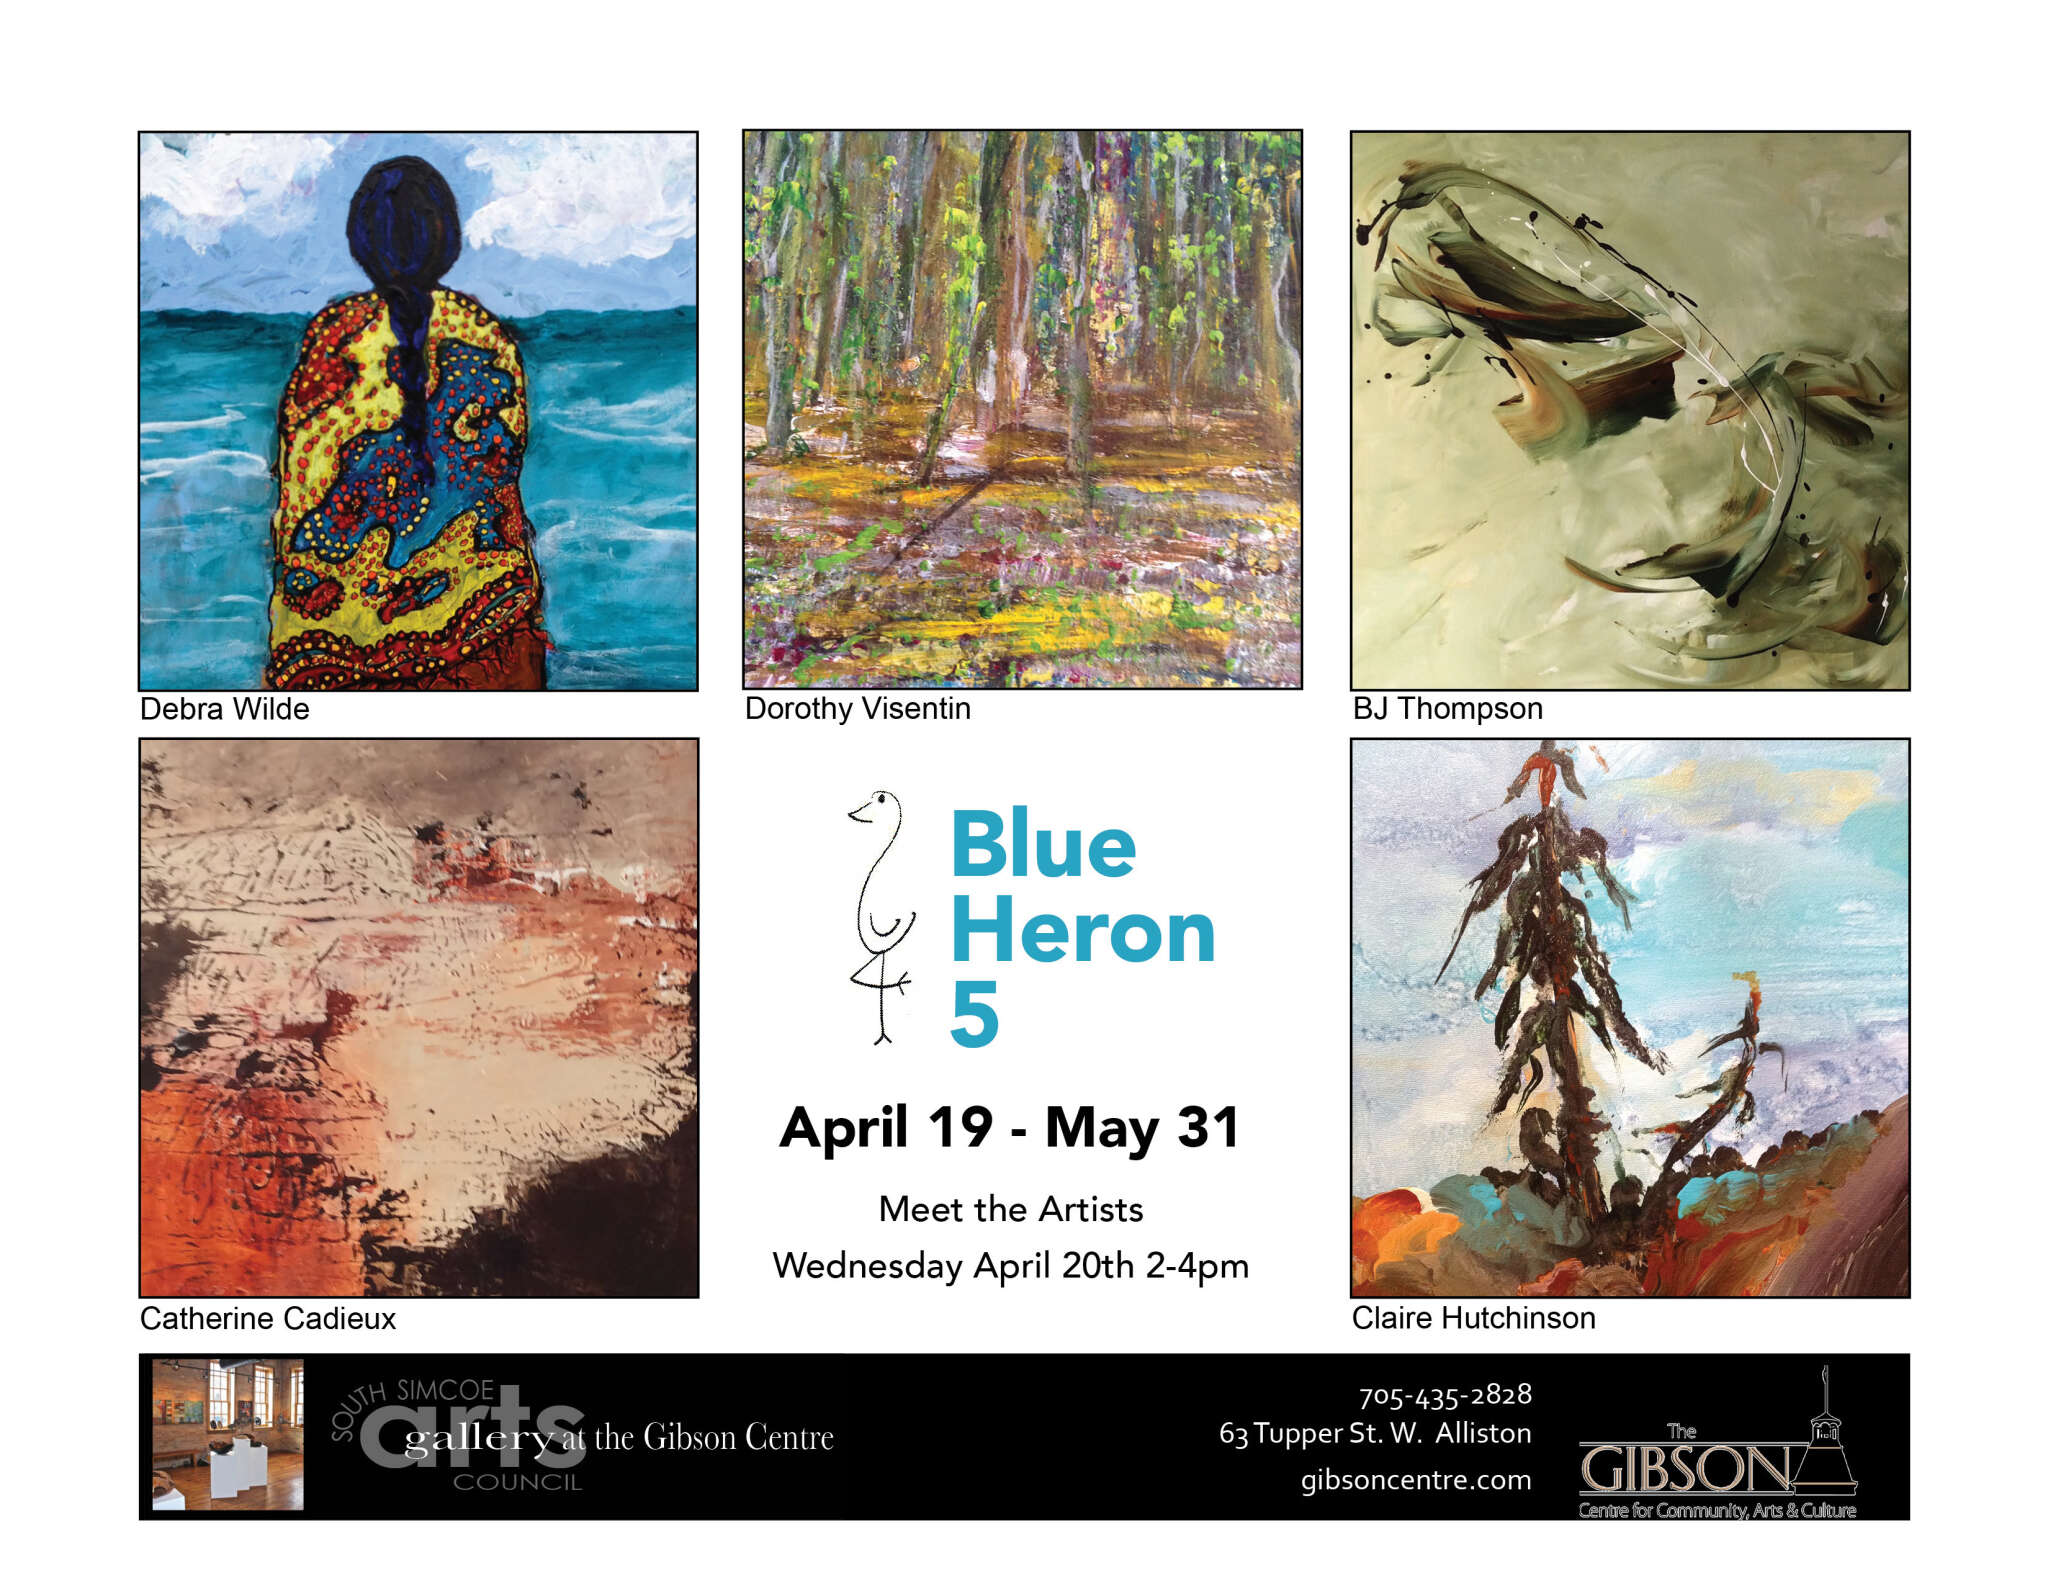 Blue Heron 5 Meet the Artists Reception this Wednesday, April 20th 2-4pm at the Gibson Centre